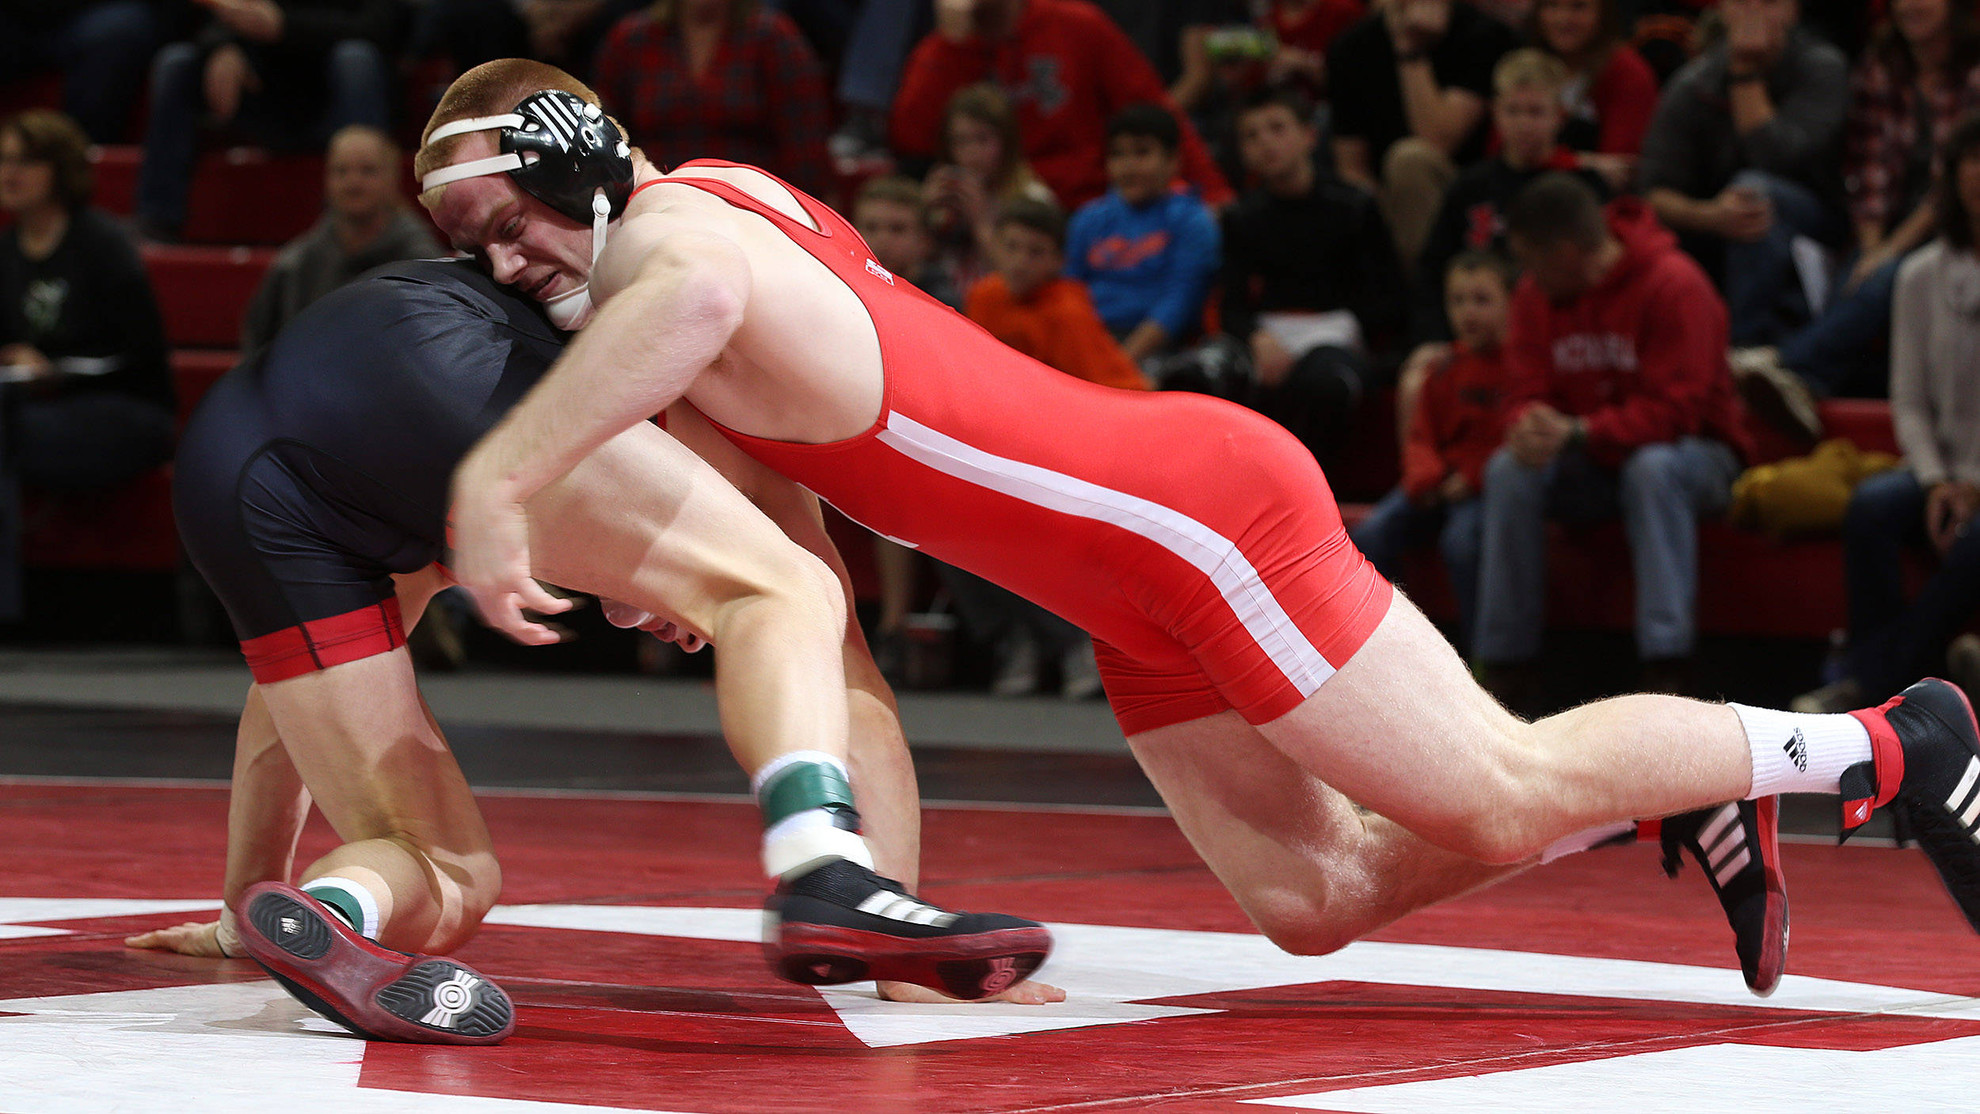 WATCH: Fastest wrestling pins of 2015-16 - how many in 10 seconds or less?  